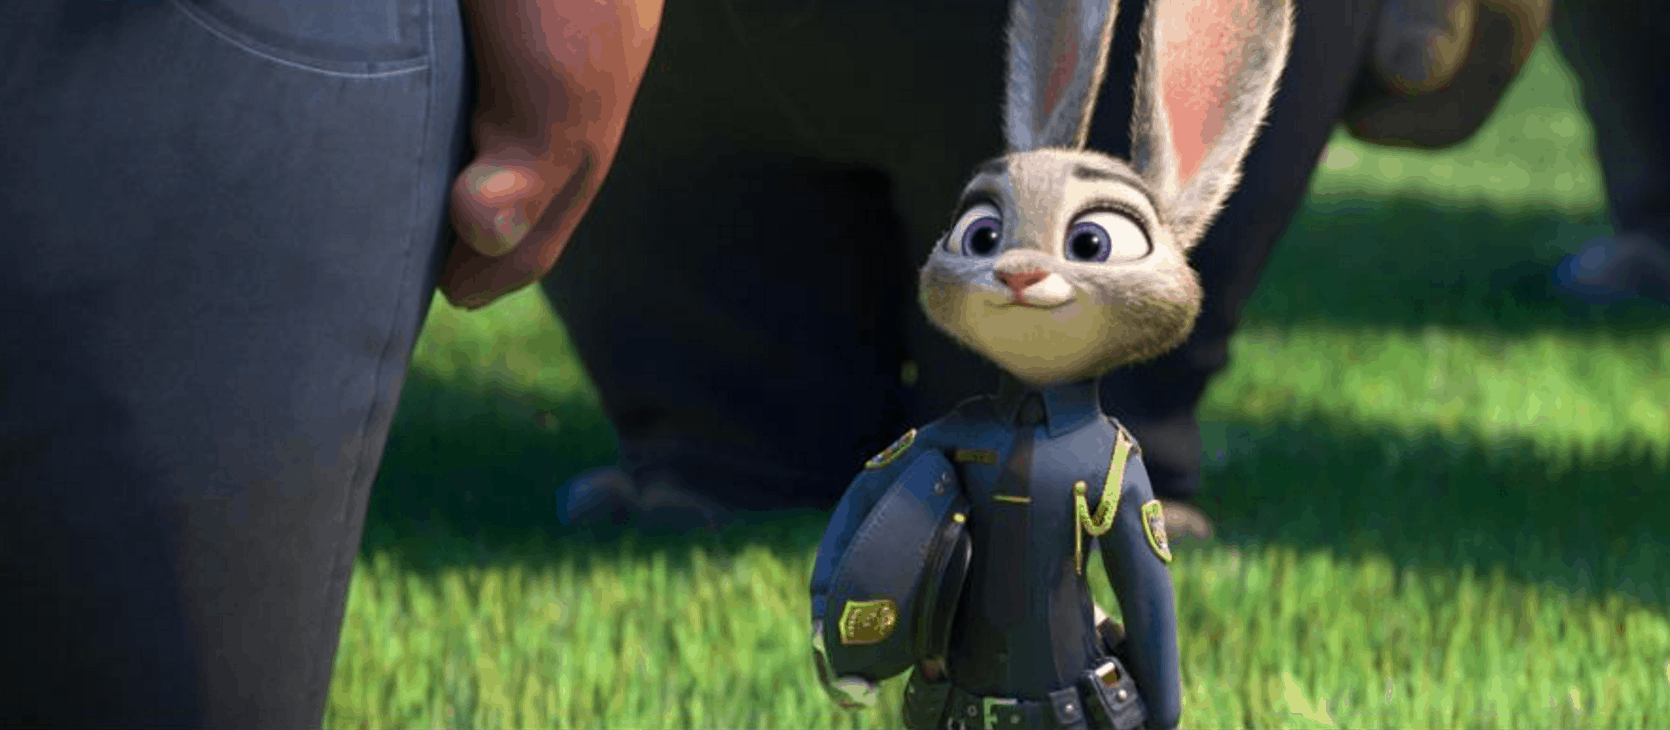 Disney's Zootopia Review and Zootopia Movie Quotes - Now Playing in Theaters